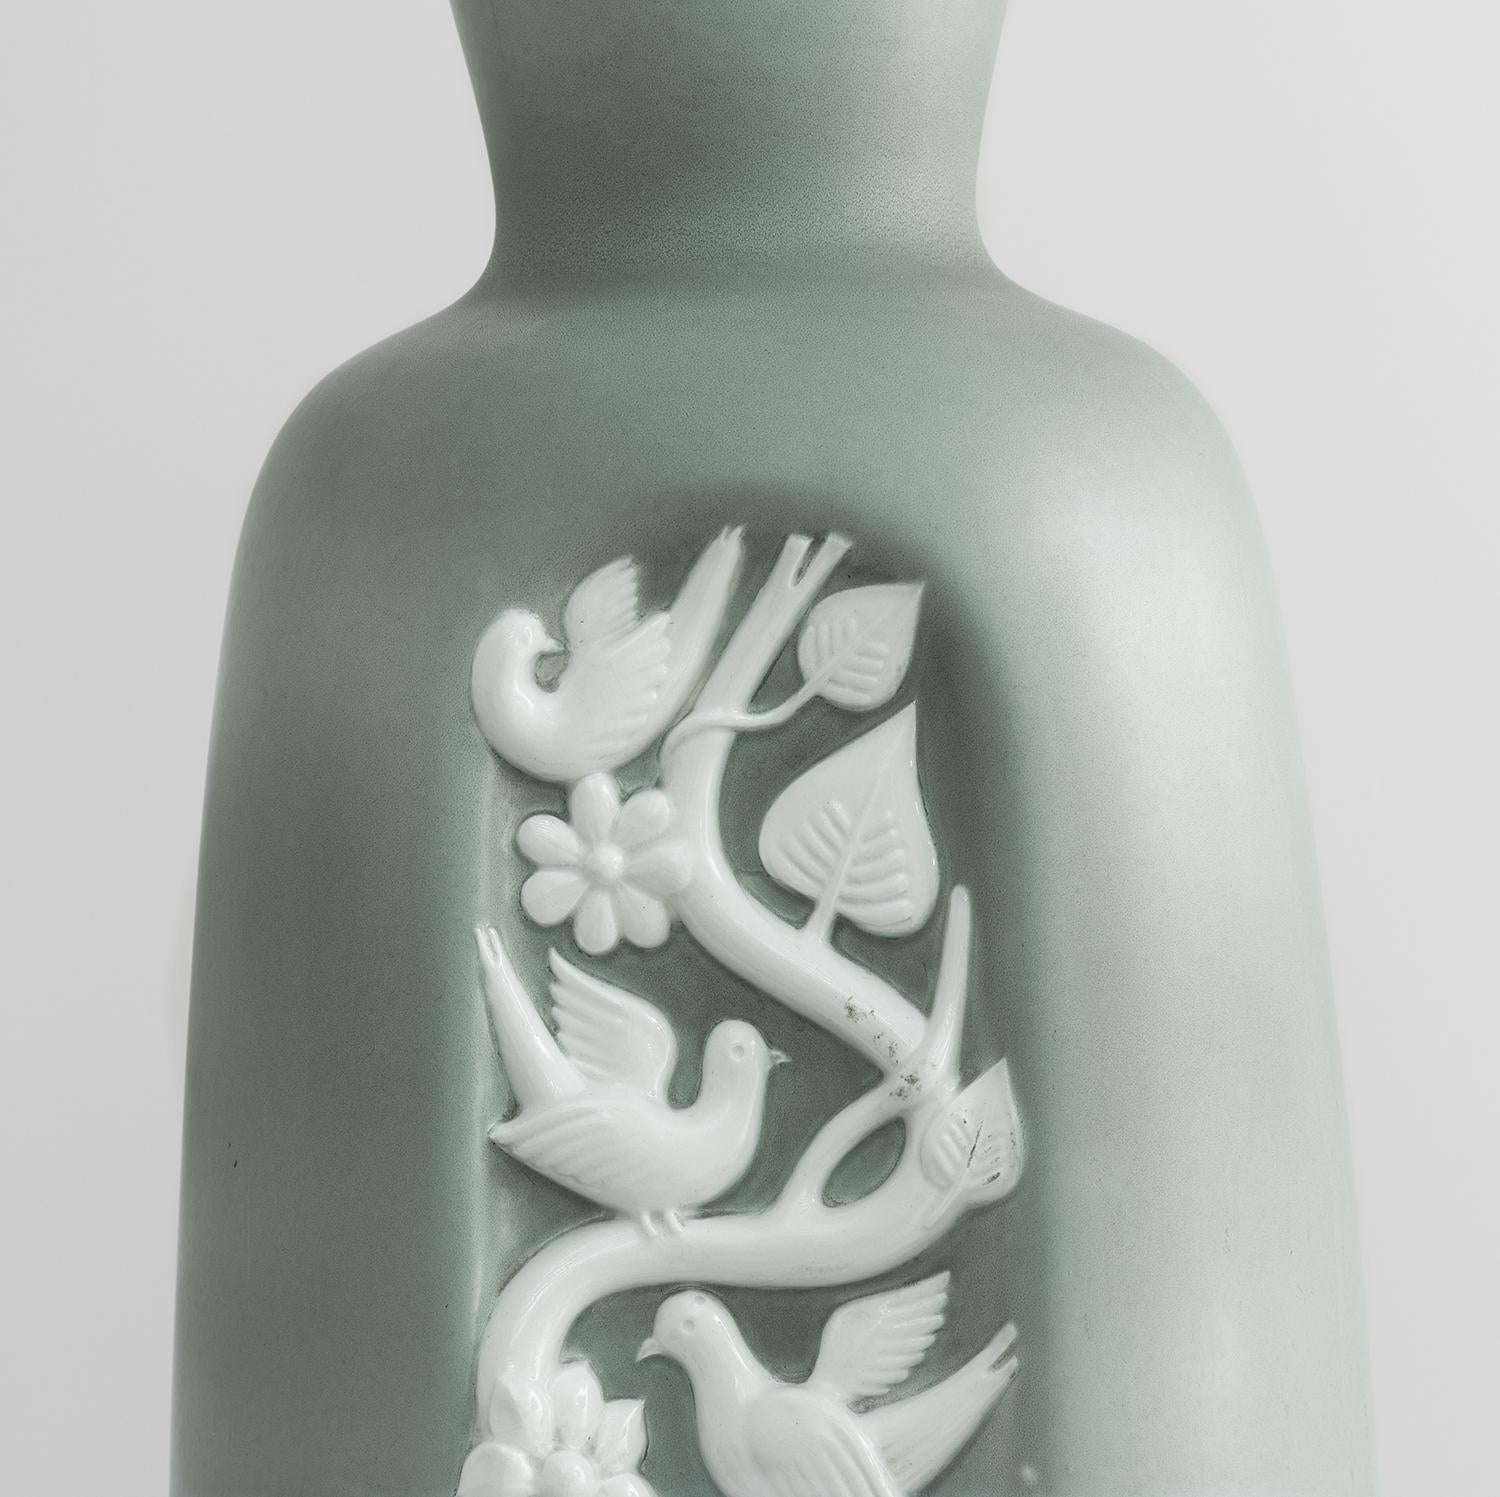 Large and rare Richard Ginori ceramic vase, designed by Giovanni Gariboldi in the 1940s, this is one of the largest designs that Gariboldi realized for the manufacture in those years, this version carries a mat green and a glossy white inlaid